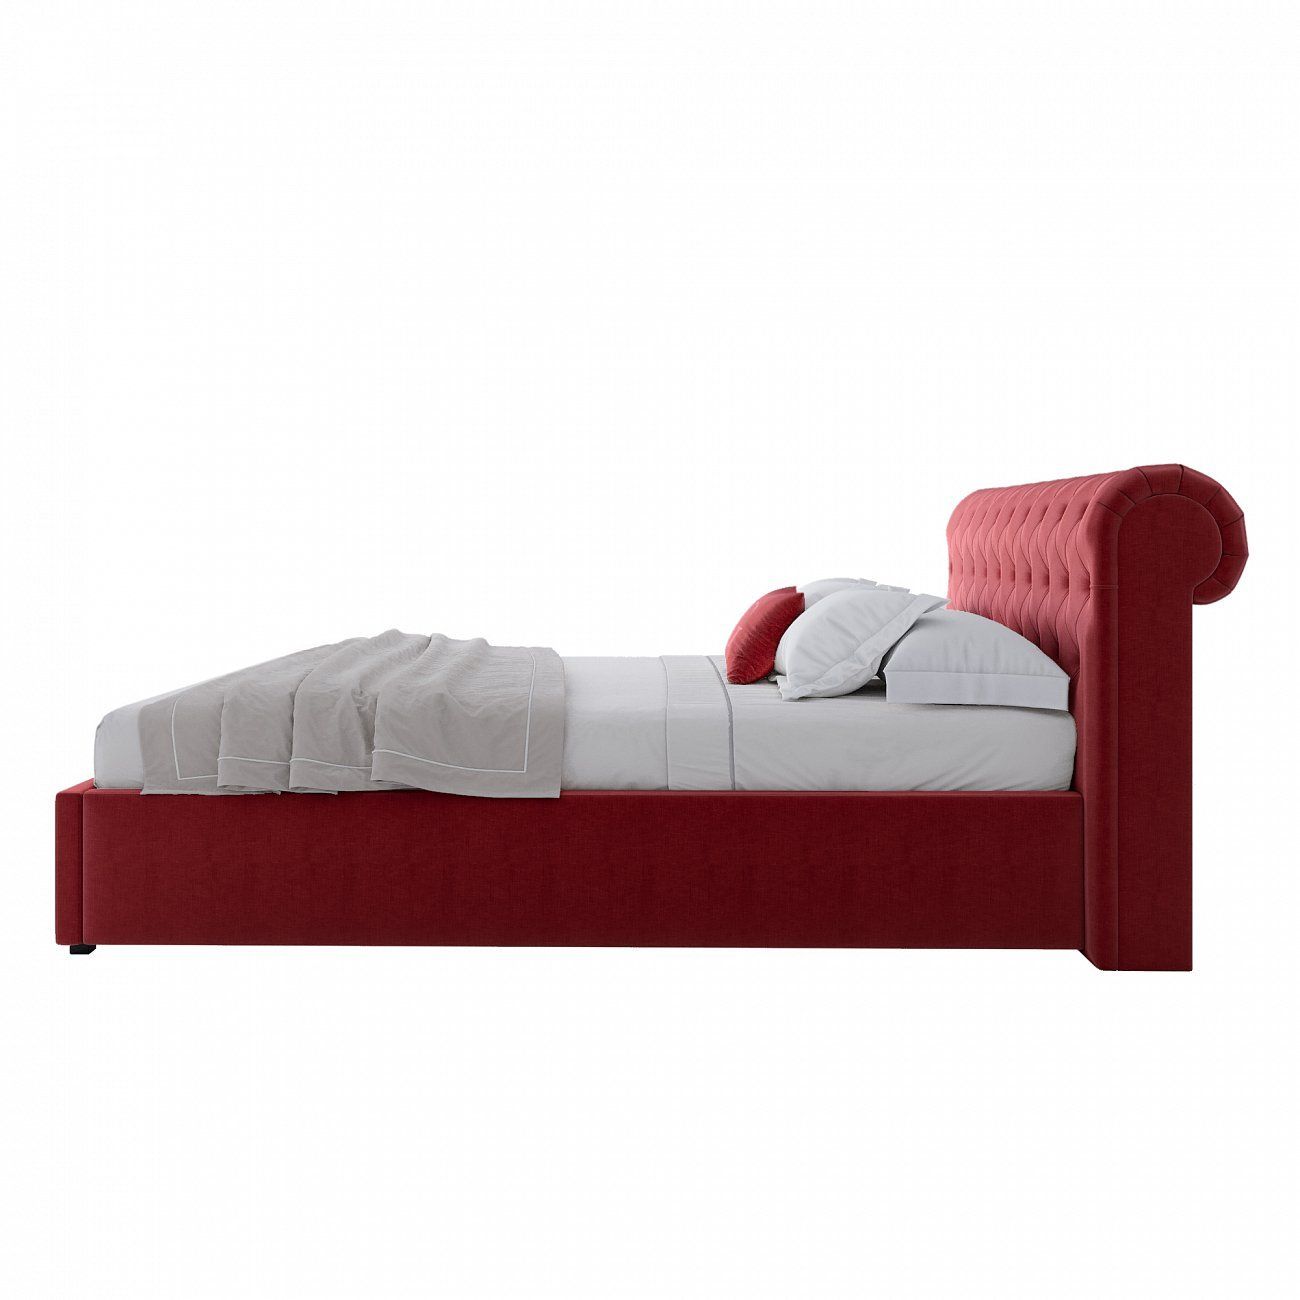 Teenage bed with carriage screed 140x200 red Sweet Dreams